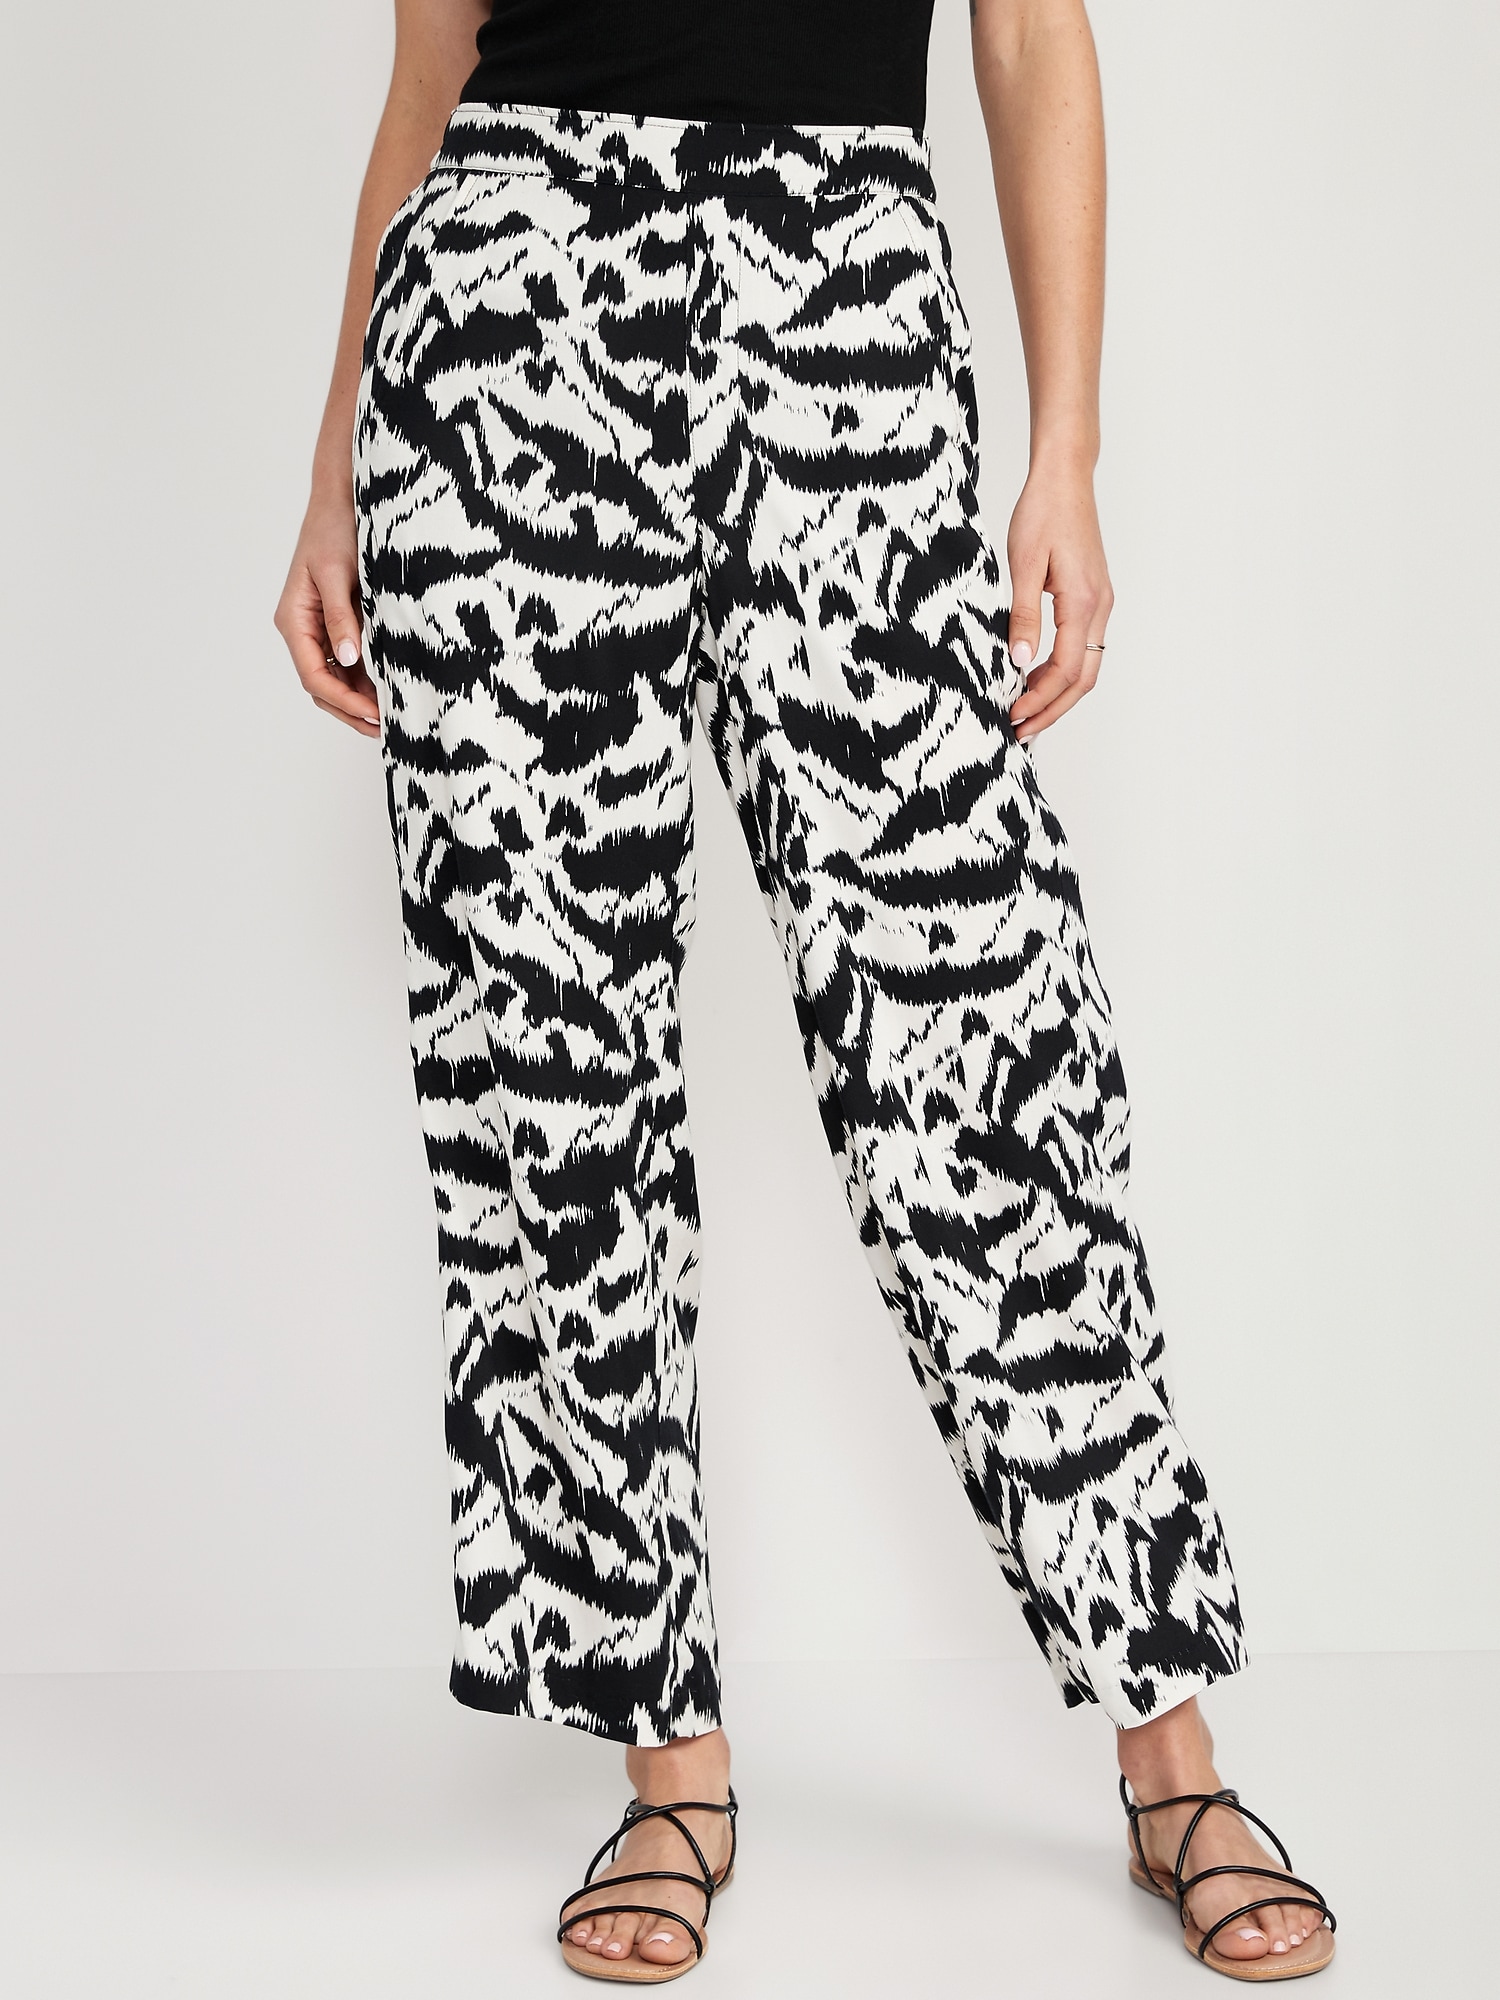 1 Piece 3 Ways How to Wear Printed Pants to Work Running Errands and on  a Date  Glamour